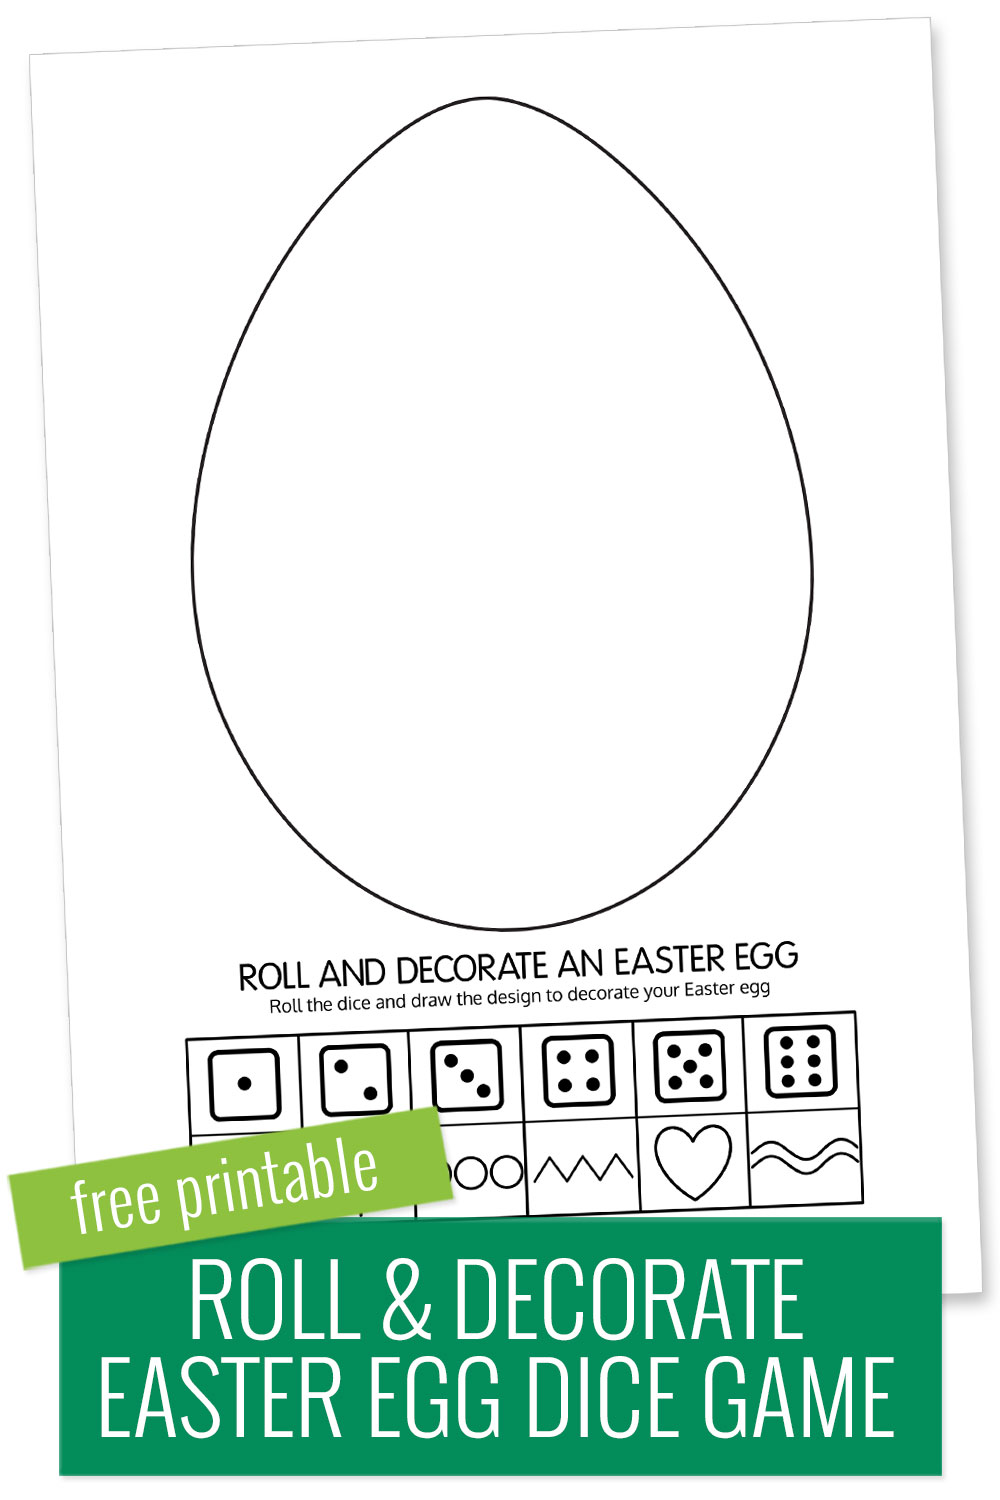 sample image of free printable roll and decorate eater egg game